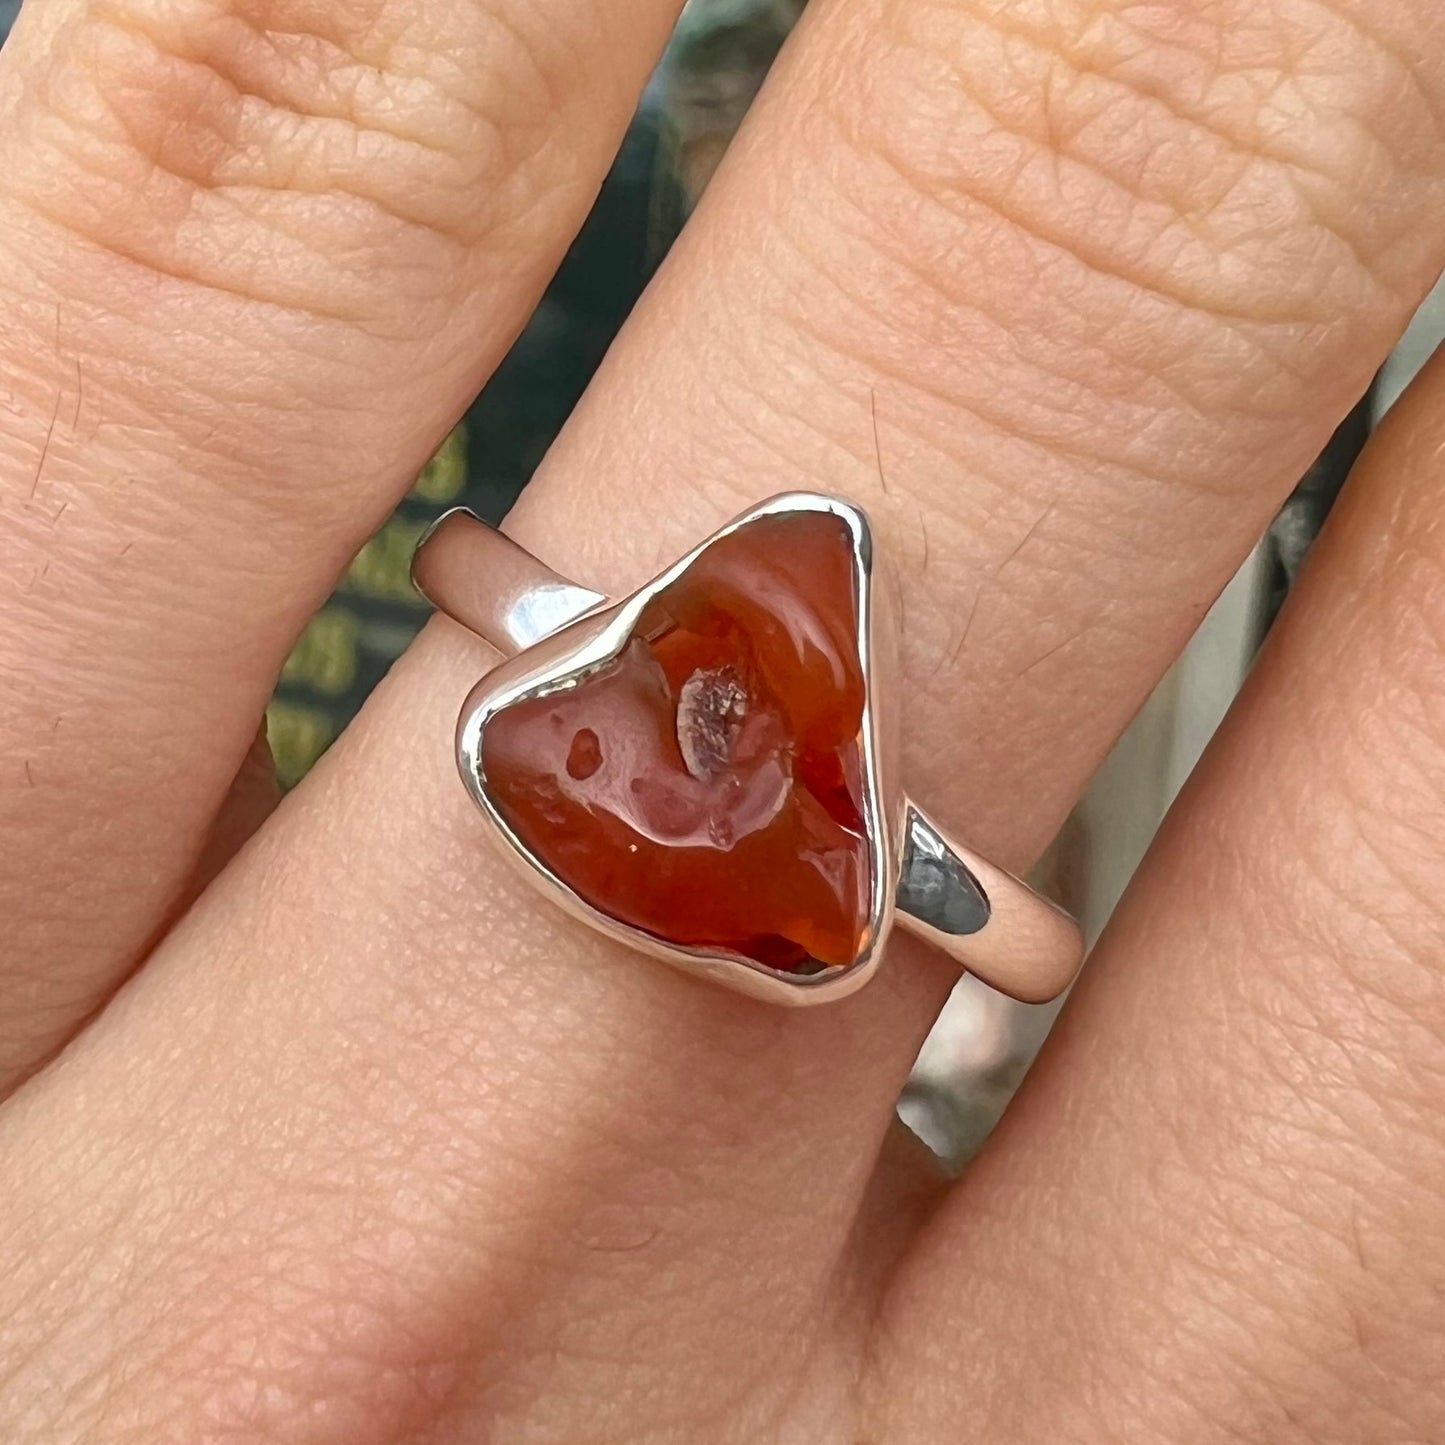 A polished fire opal crystal bezel set into a sterling silver ring.  The opal is an orange color.